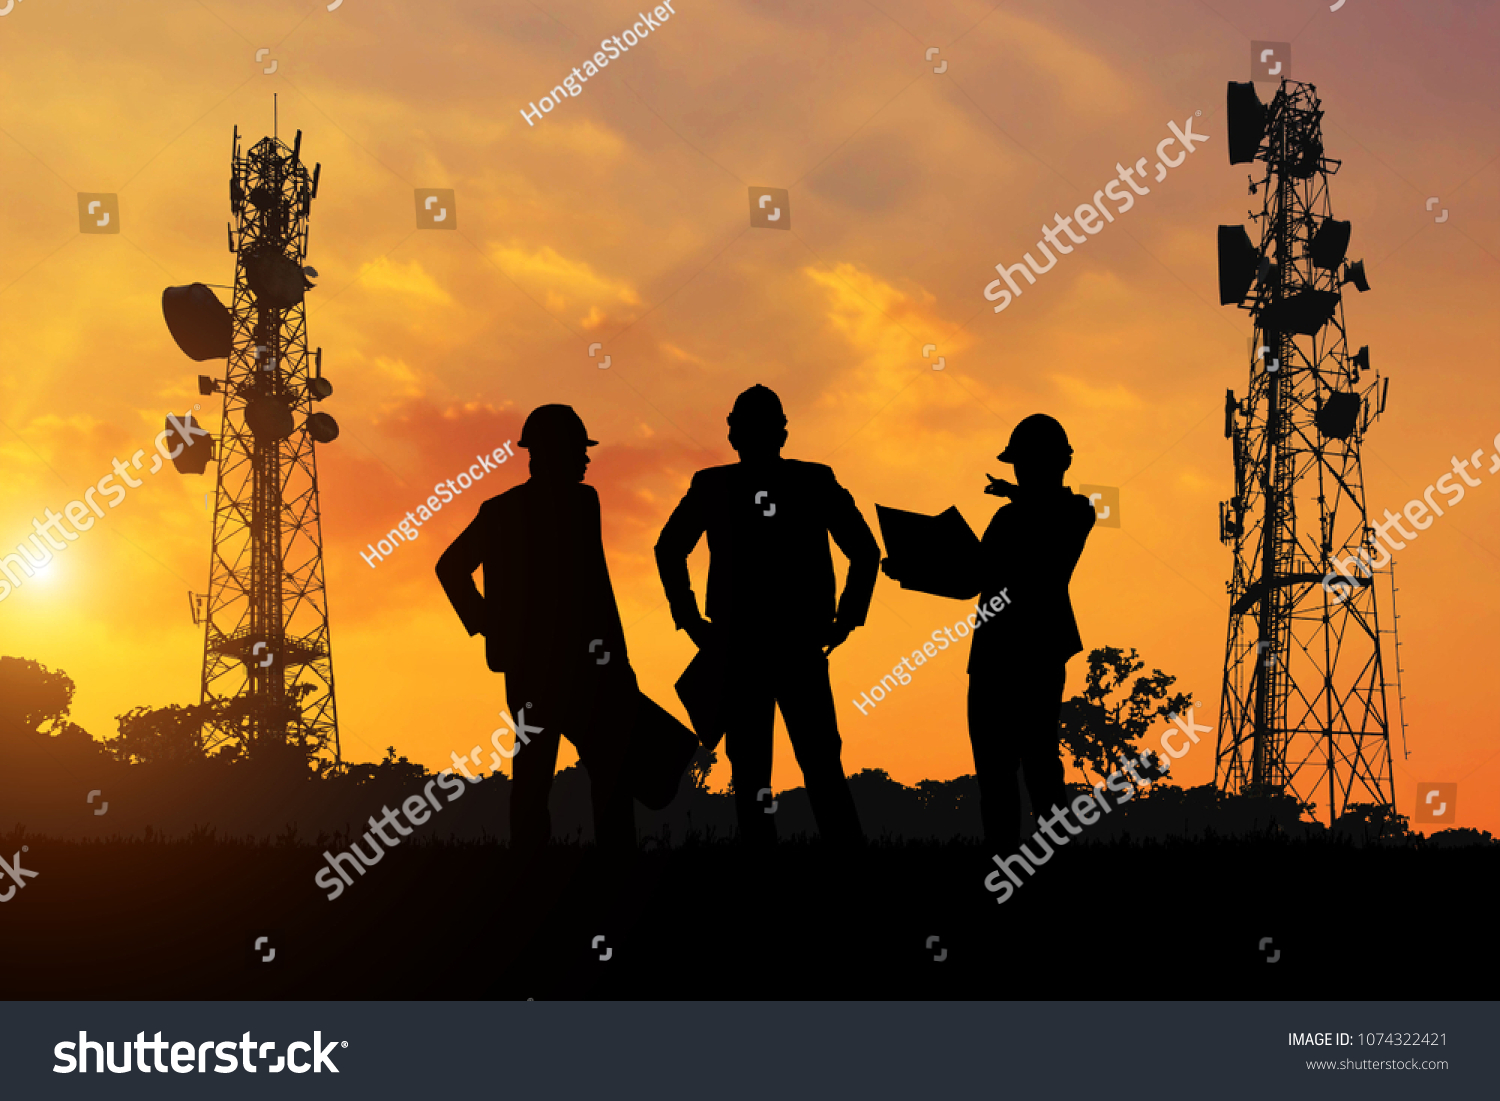 Silhouette of the engineers look at the telecommunication poles planned to be built at sunset time. #1074322421